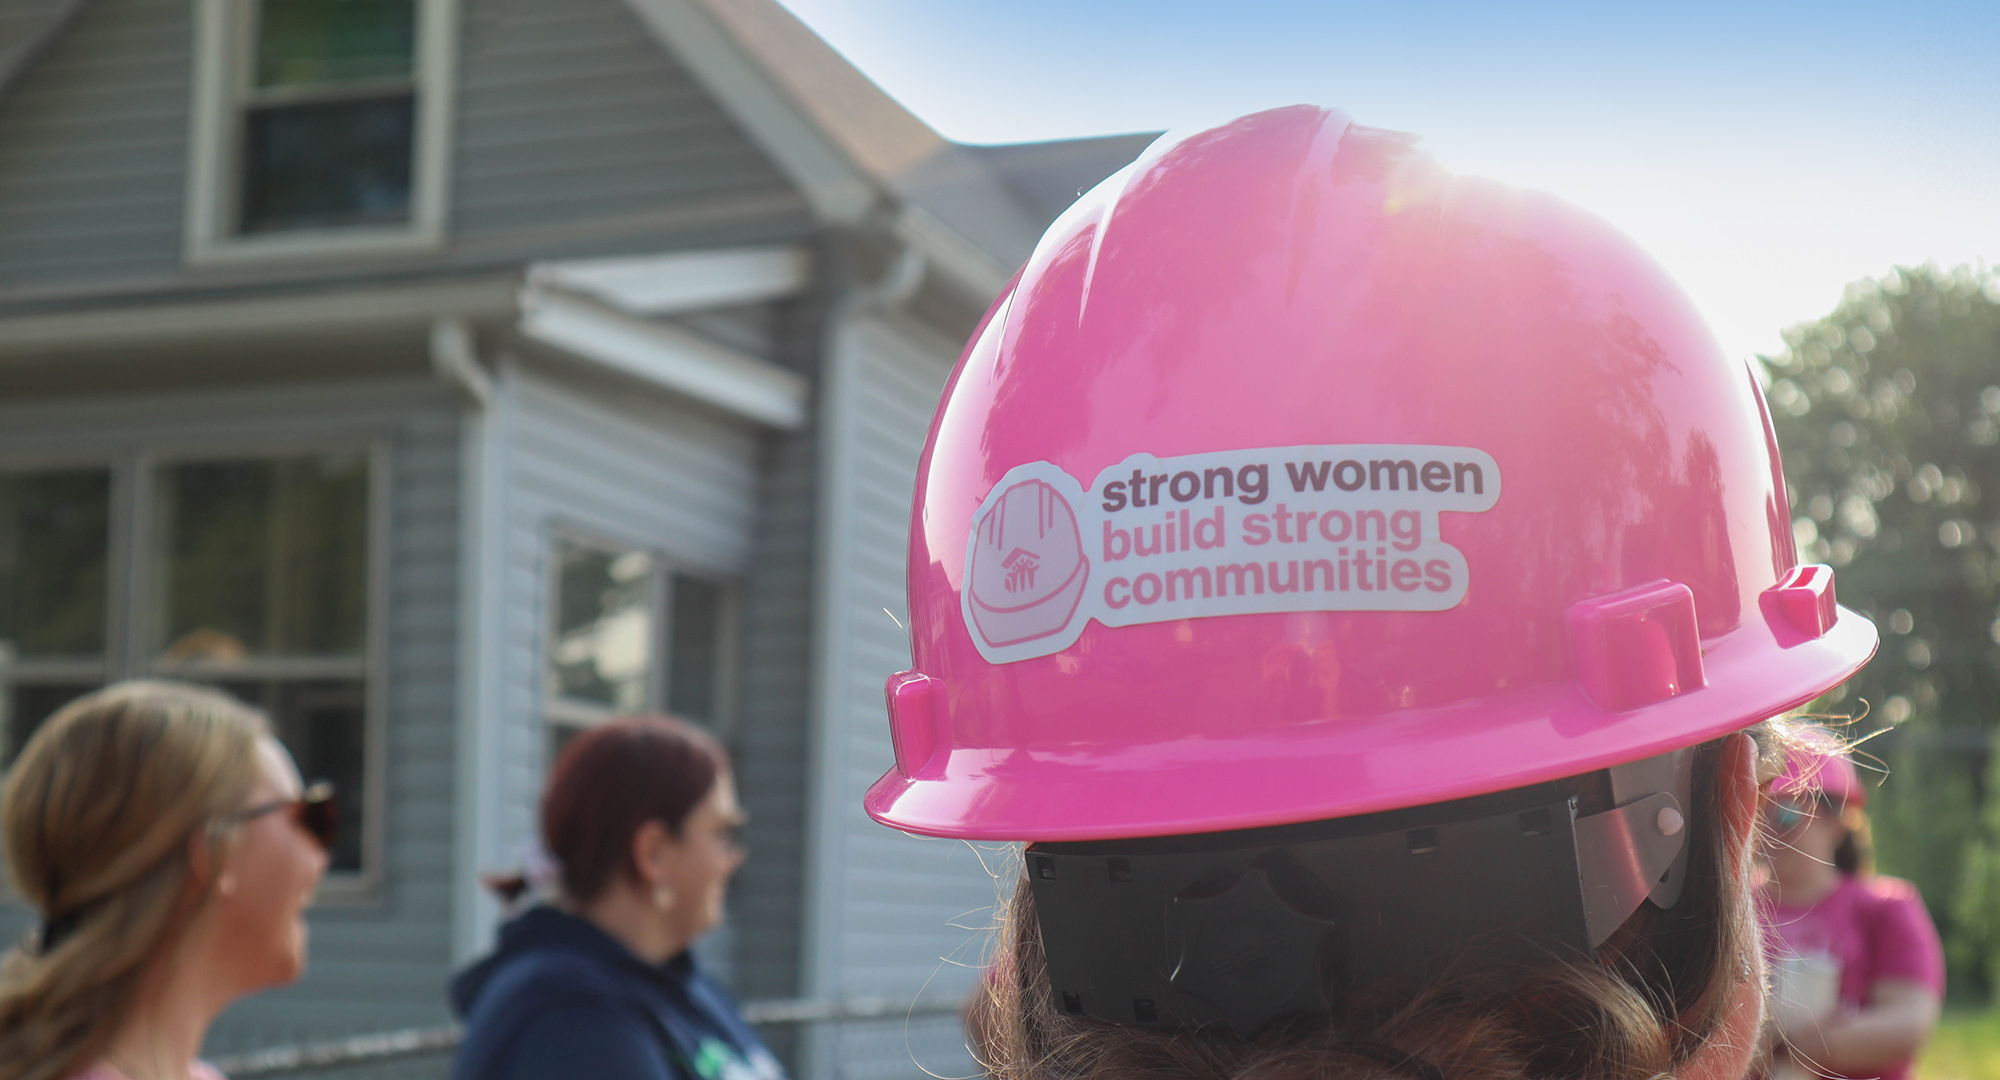 Pink hard hat with sticker "strong women build strong communities"